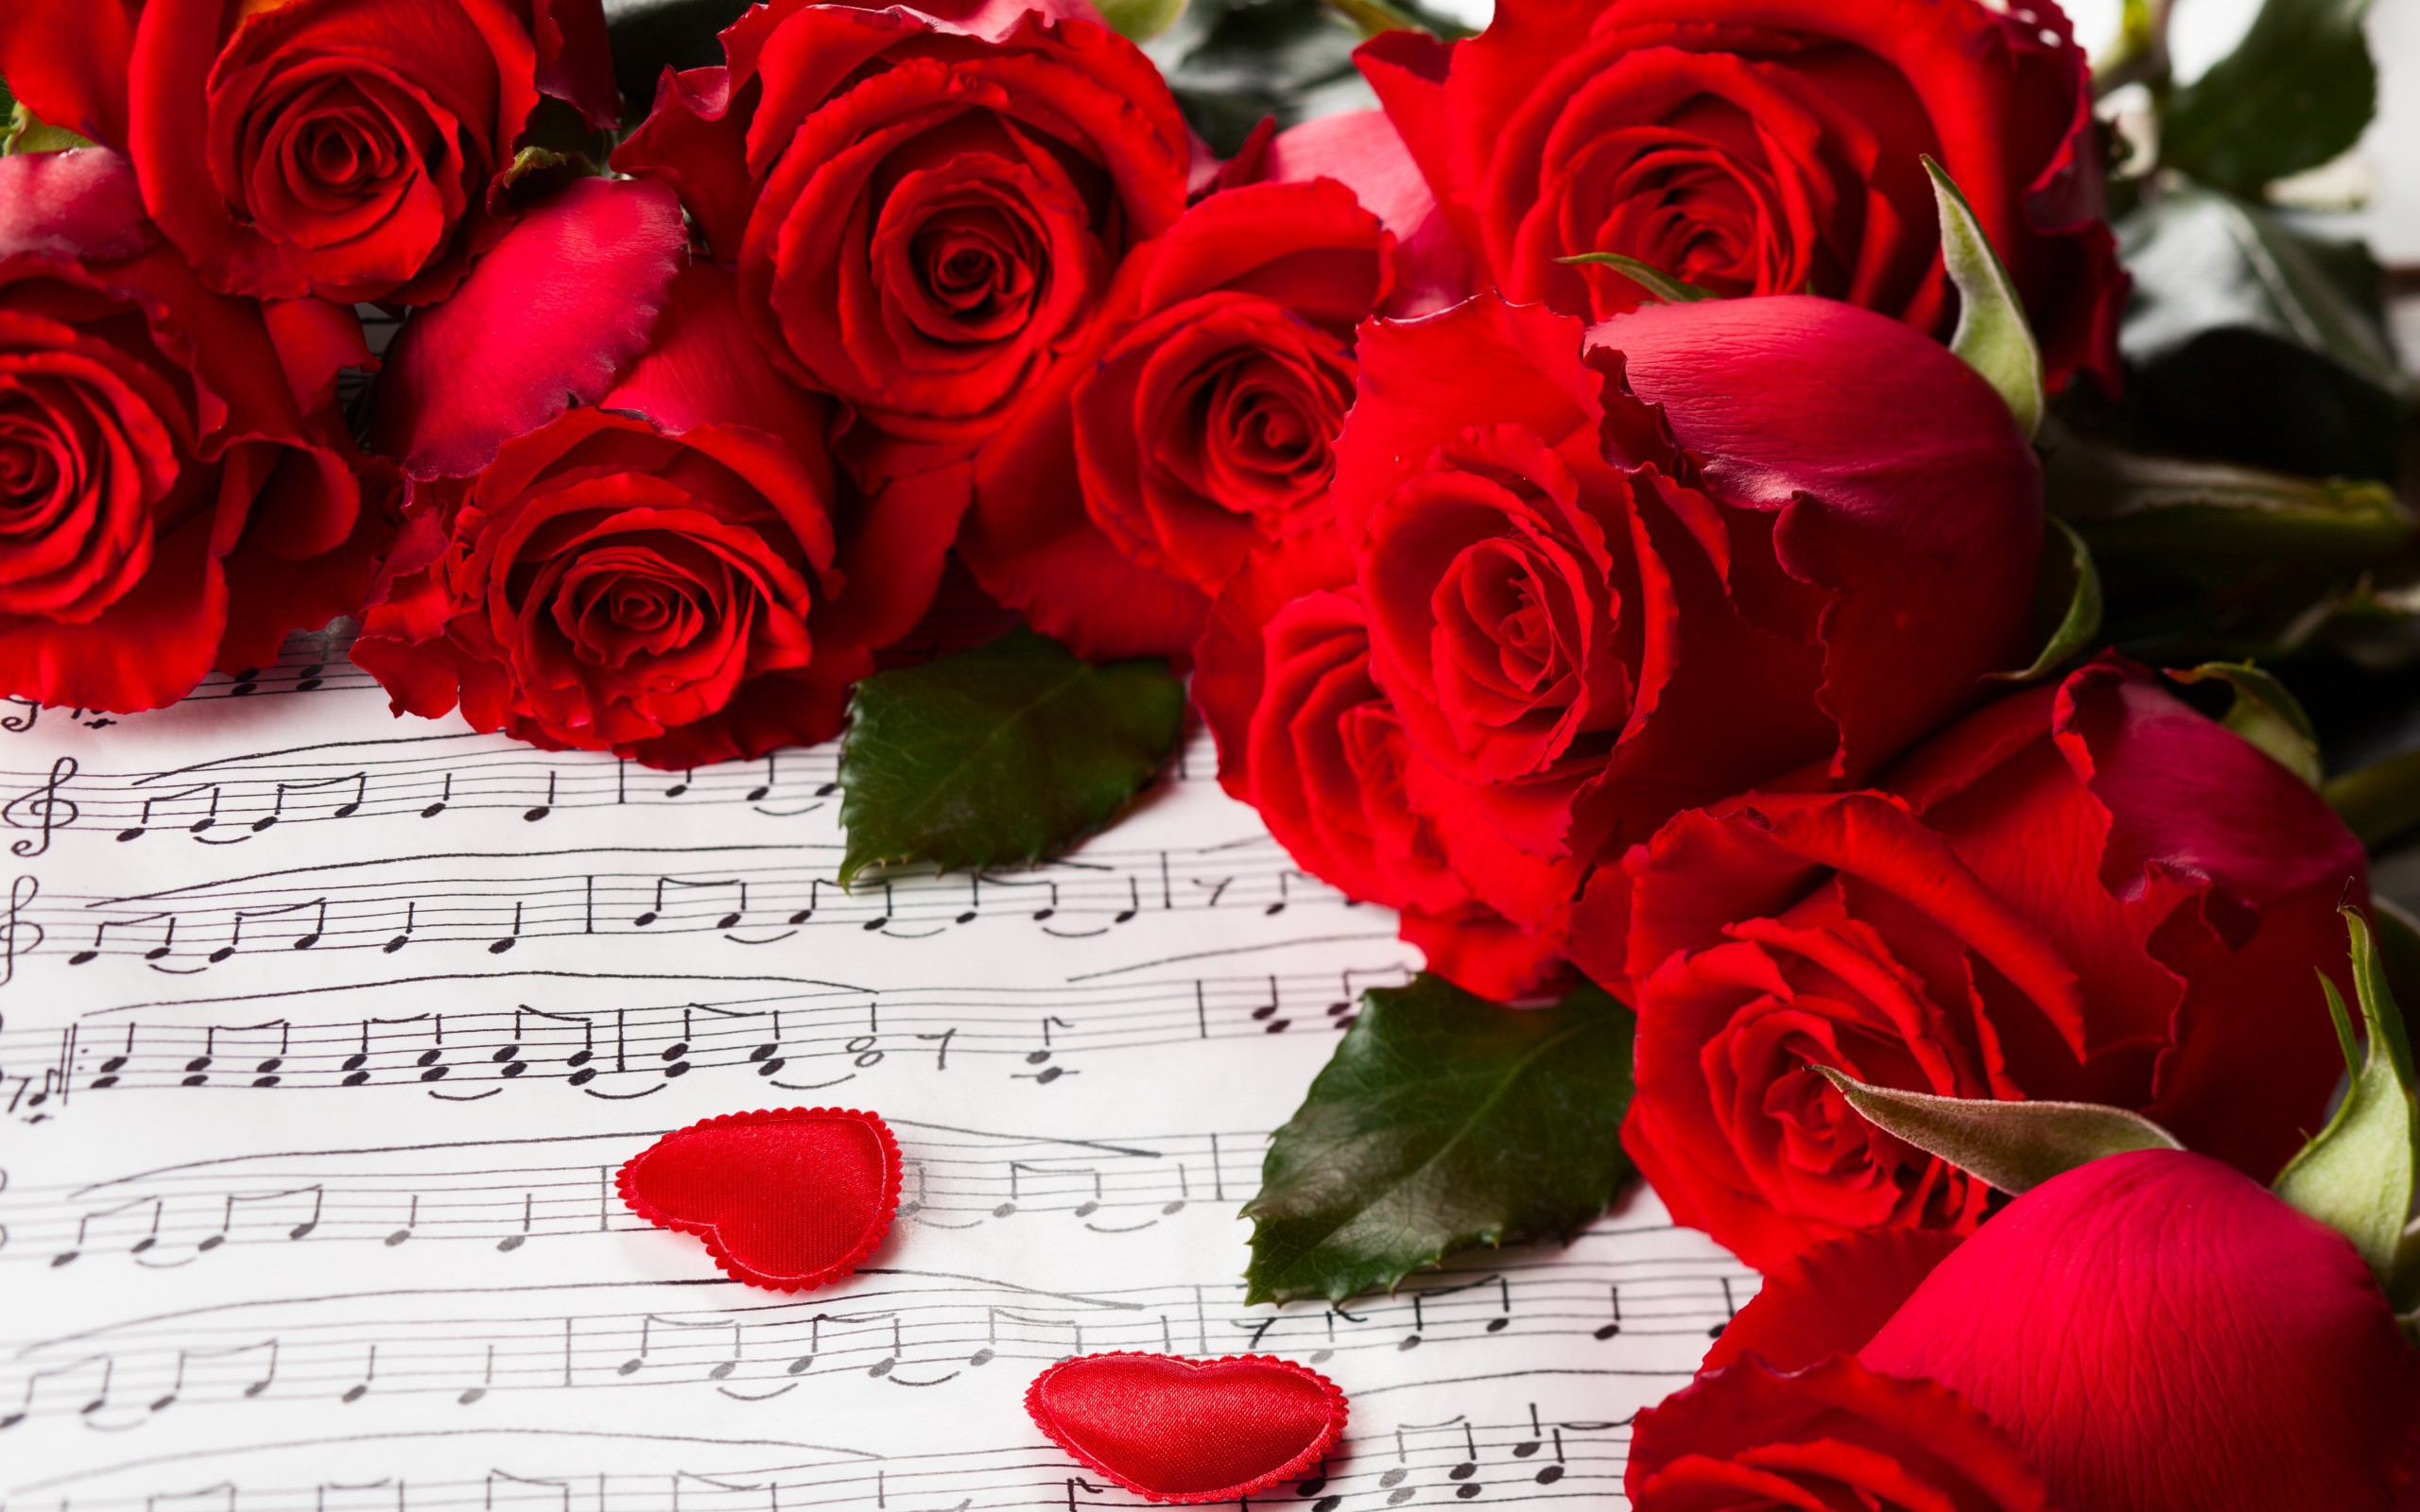 Red roses on March 8 on the background sheet music ...
